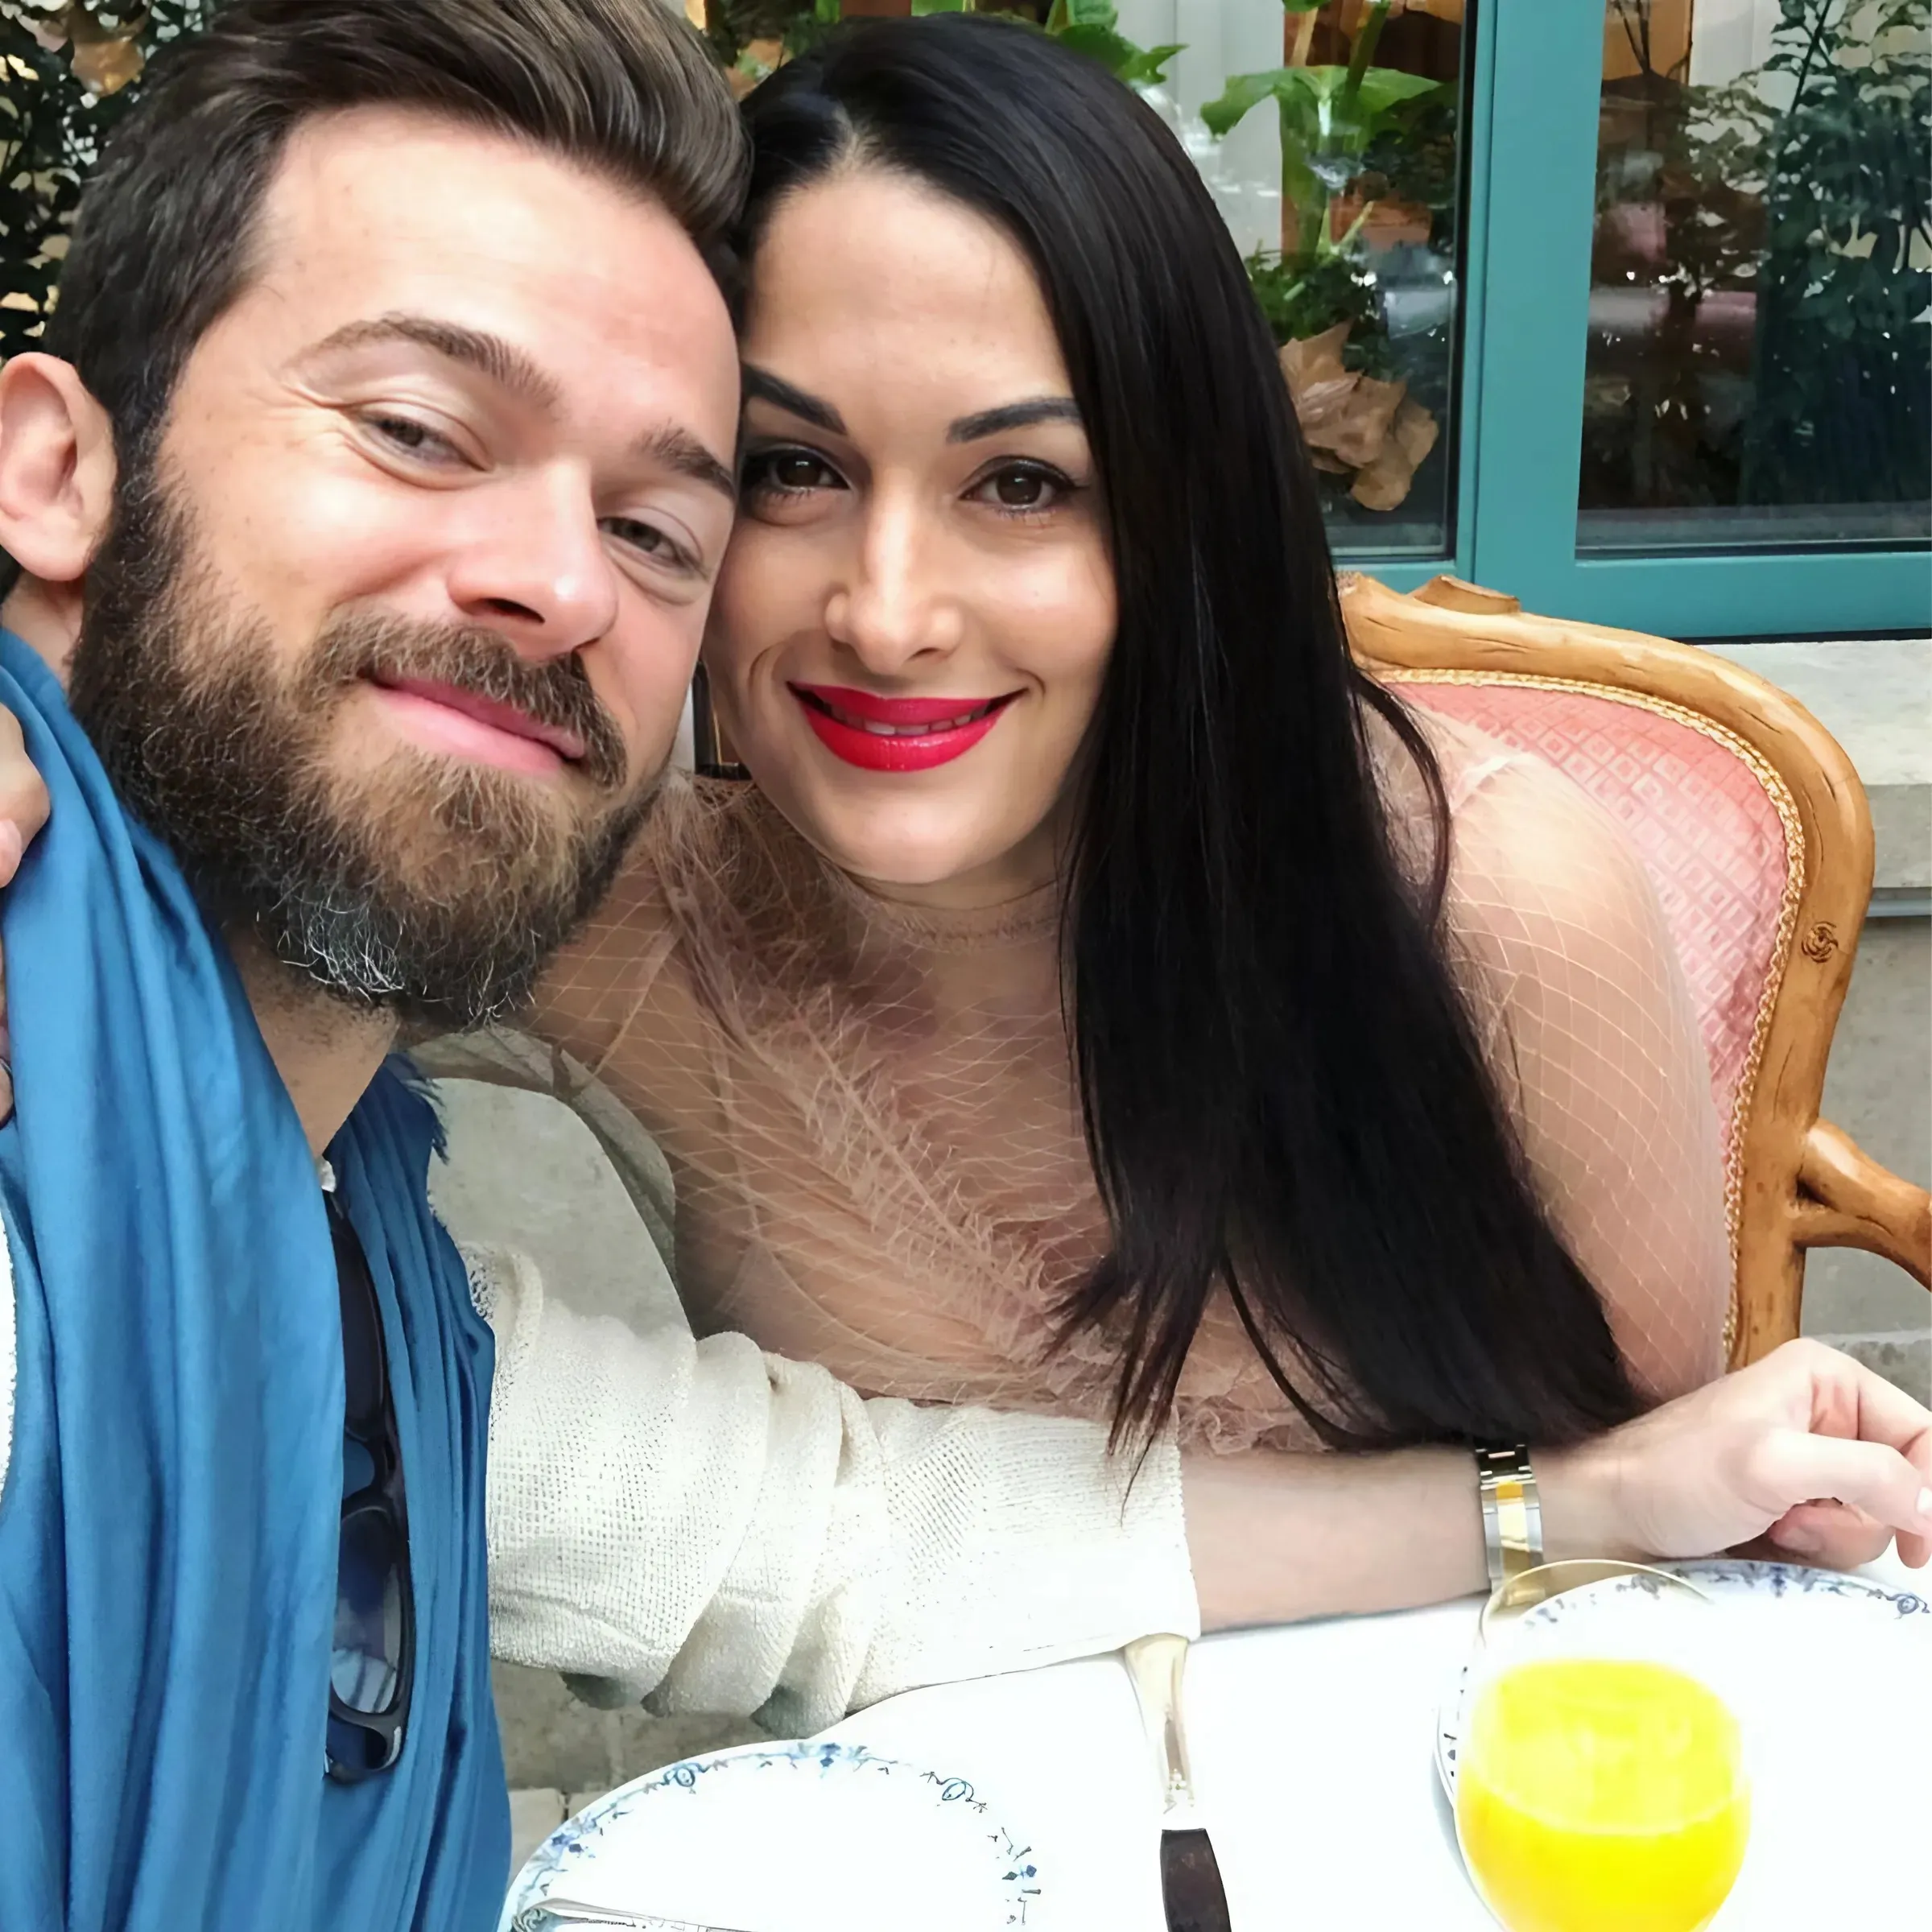 Artem Chigvintsev & Nikki Garcia Talk Baby #2: ‘People Are Going to Be Very Excited’